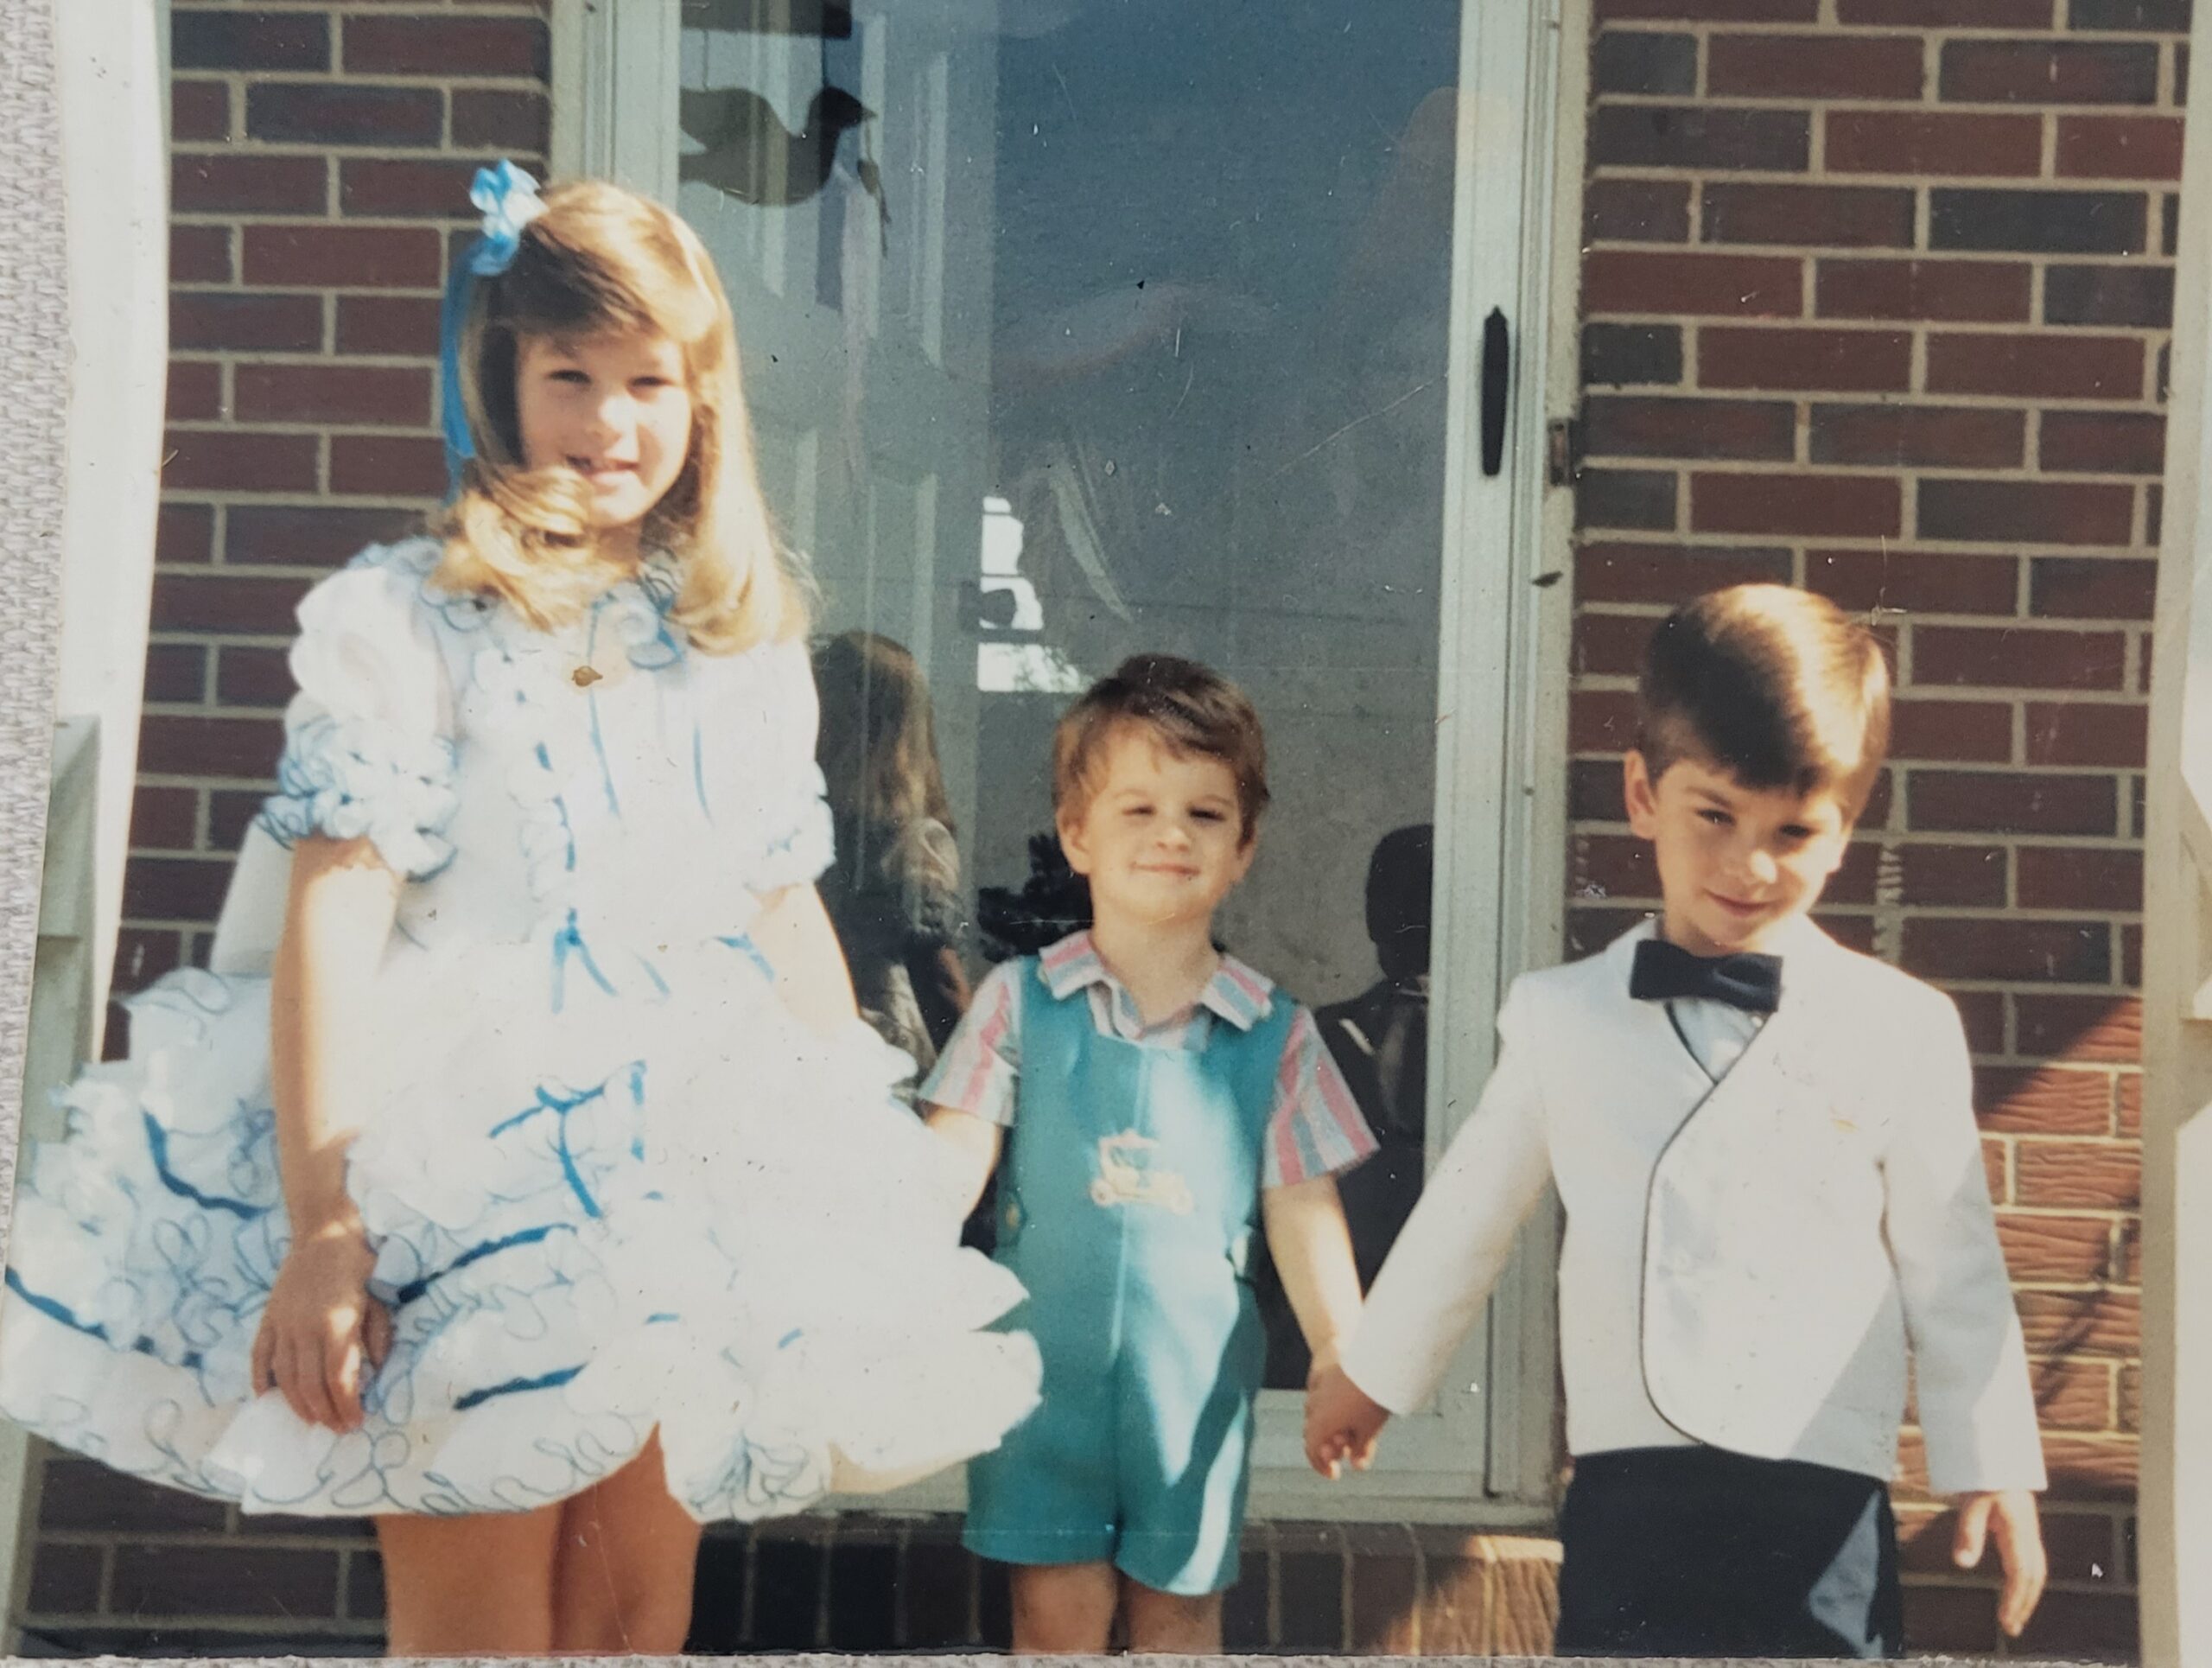 Easter in the 80s: How A Dress Changed My Perspective